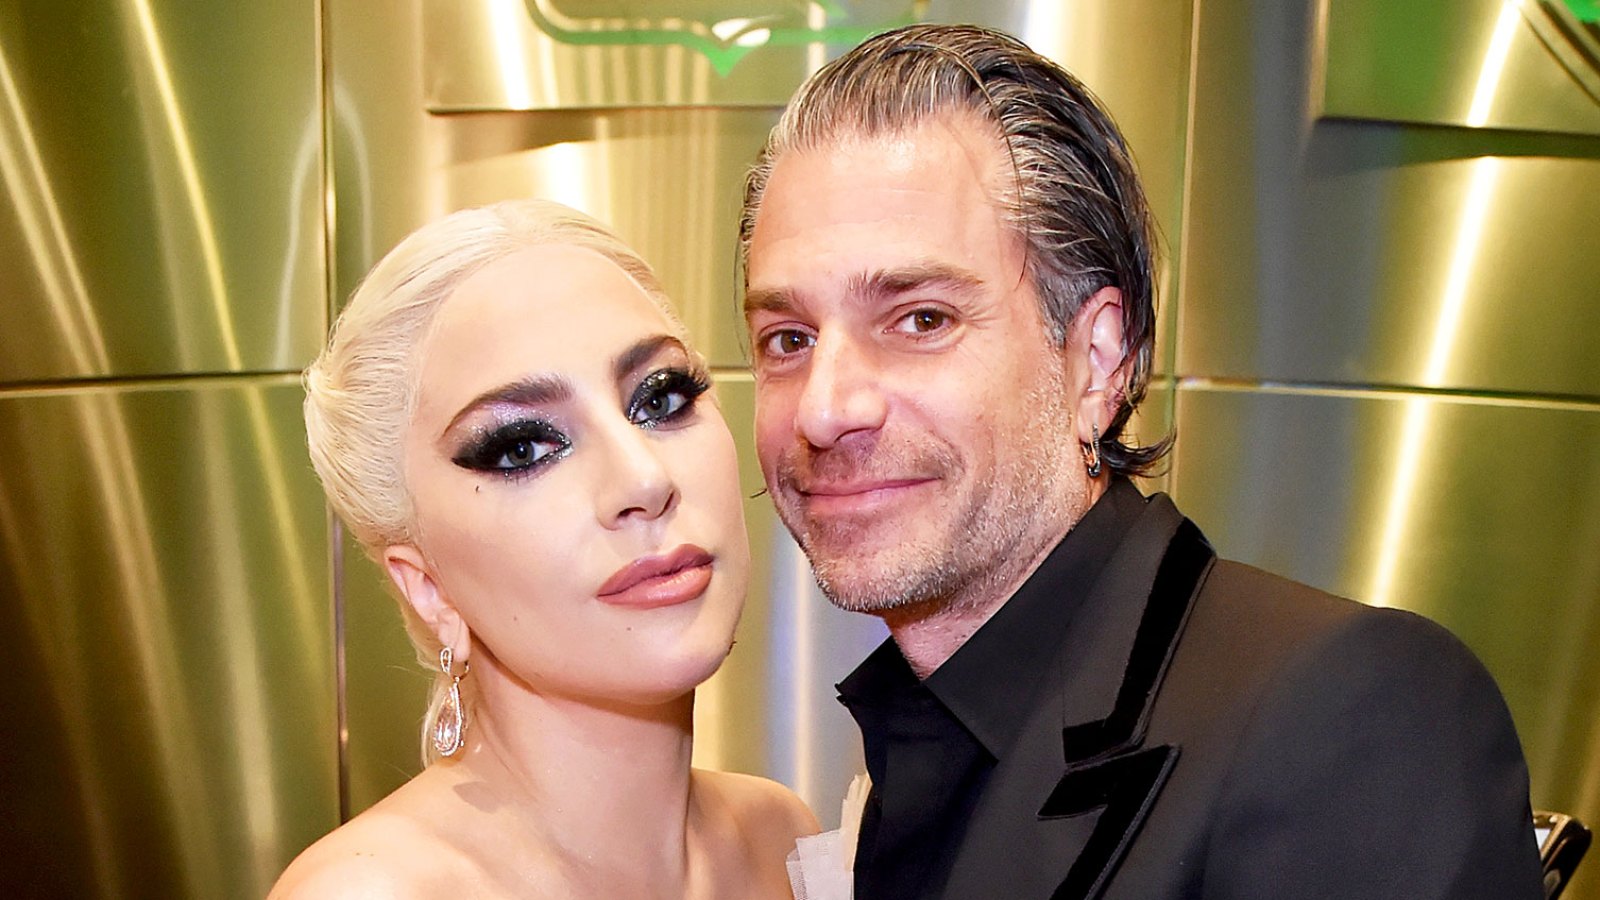 Lady Gaga and Christian Carino backstage at the 60th Annual Grammy Awards at Madison Square Garden in New York City.